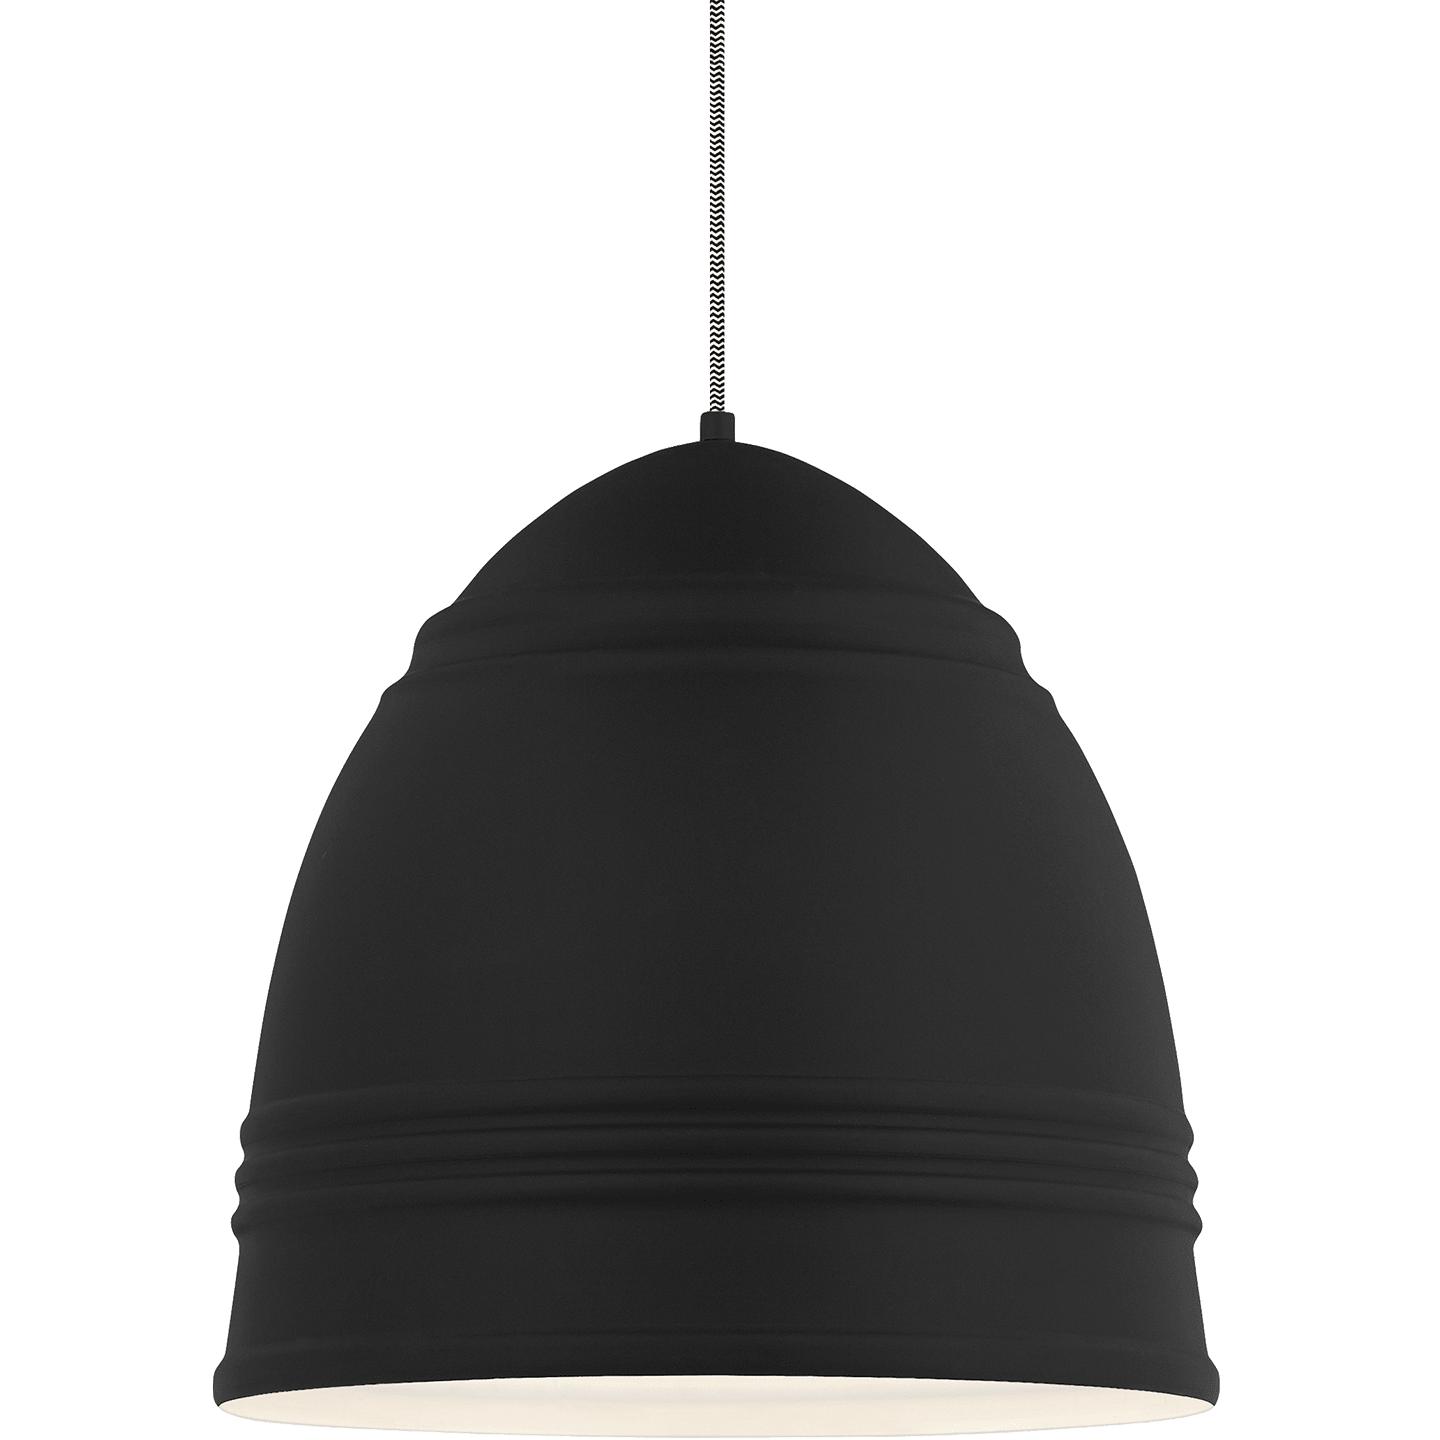 Rubberized Black w/ White Interior Lamp Not Included Black